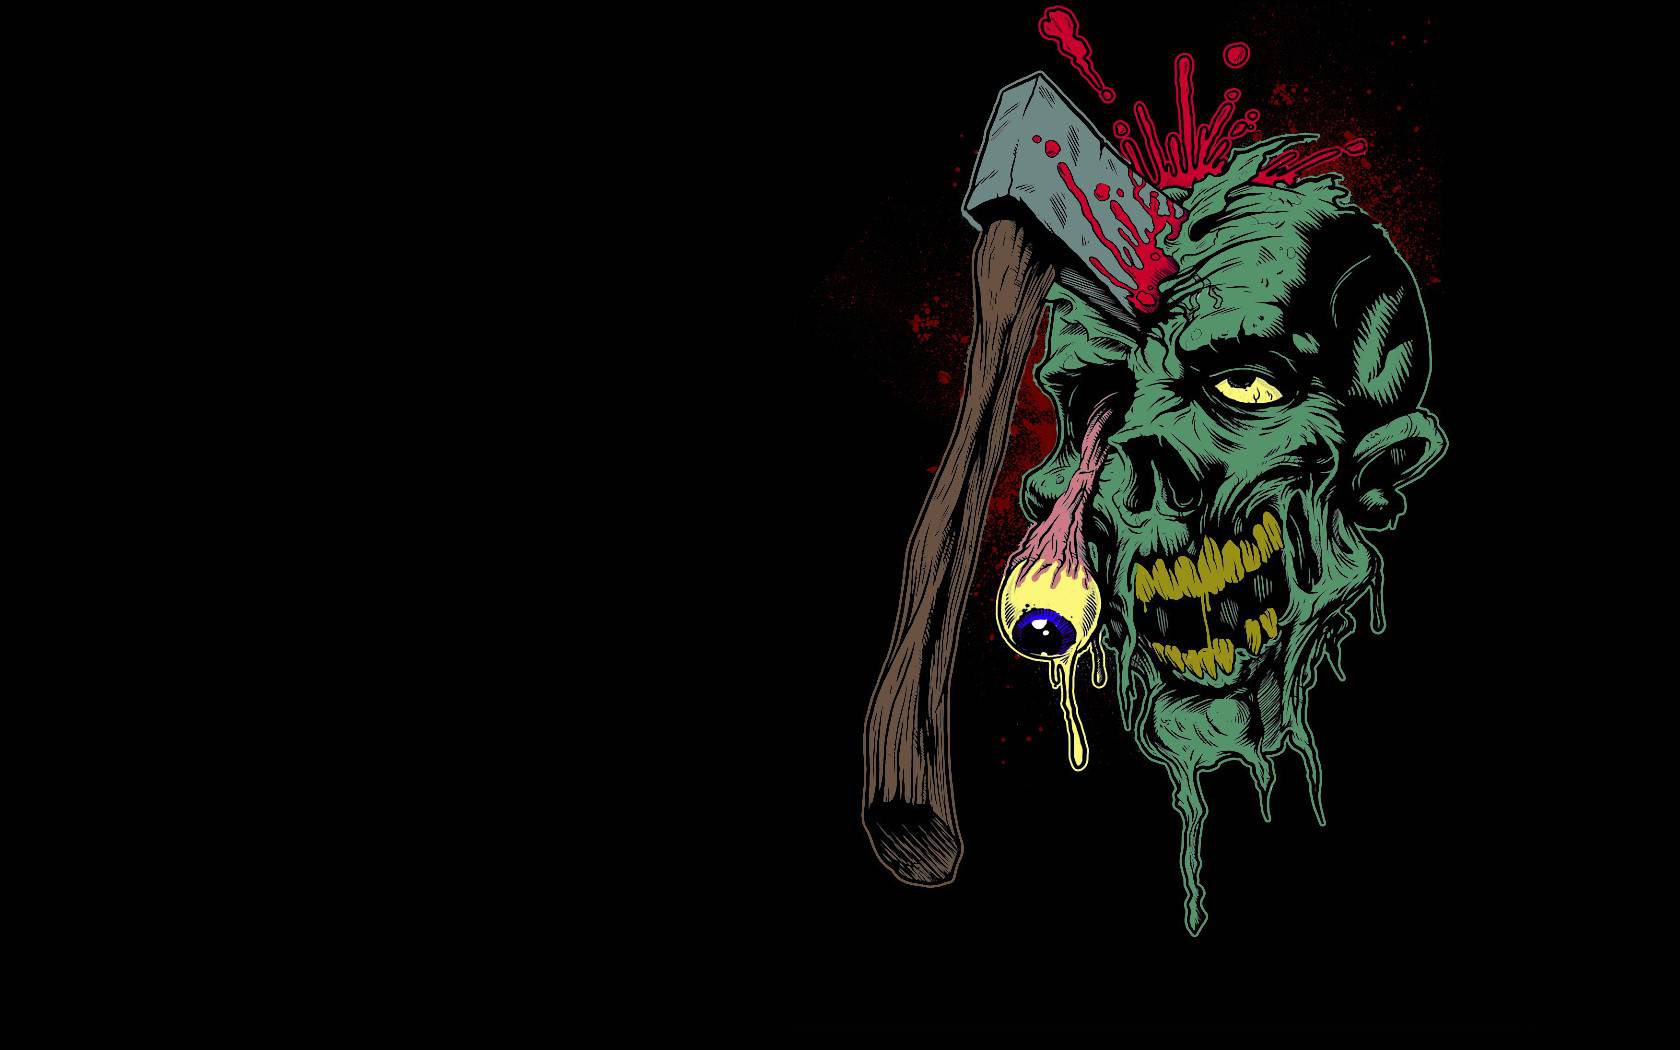 Zombie Wallpapers 10313 - HD Wallpapers Site